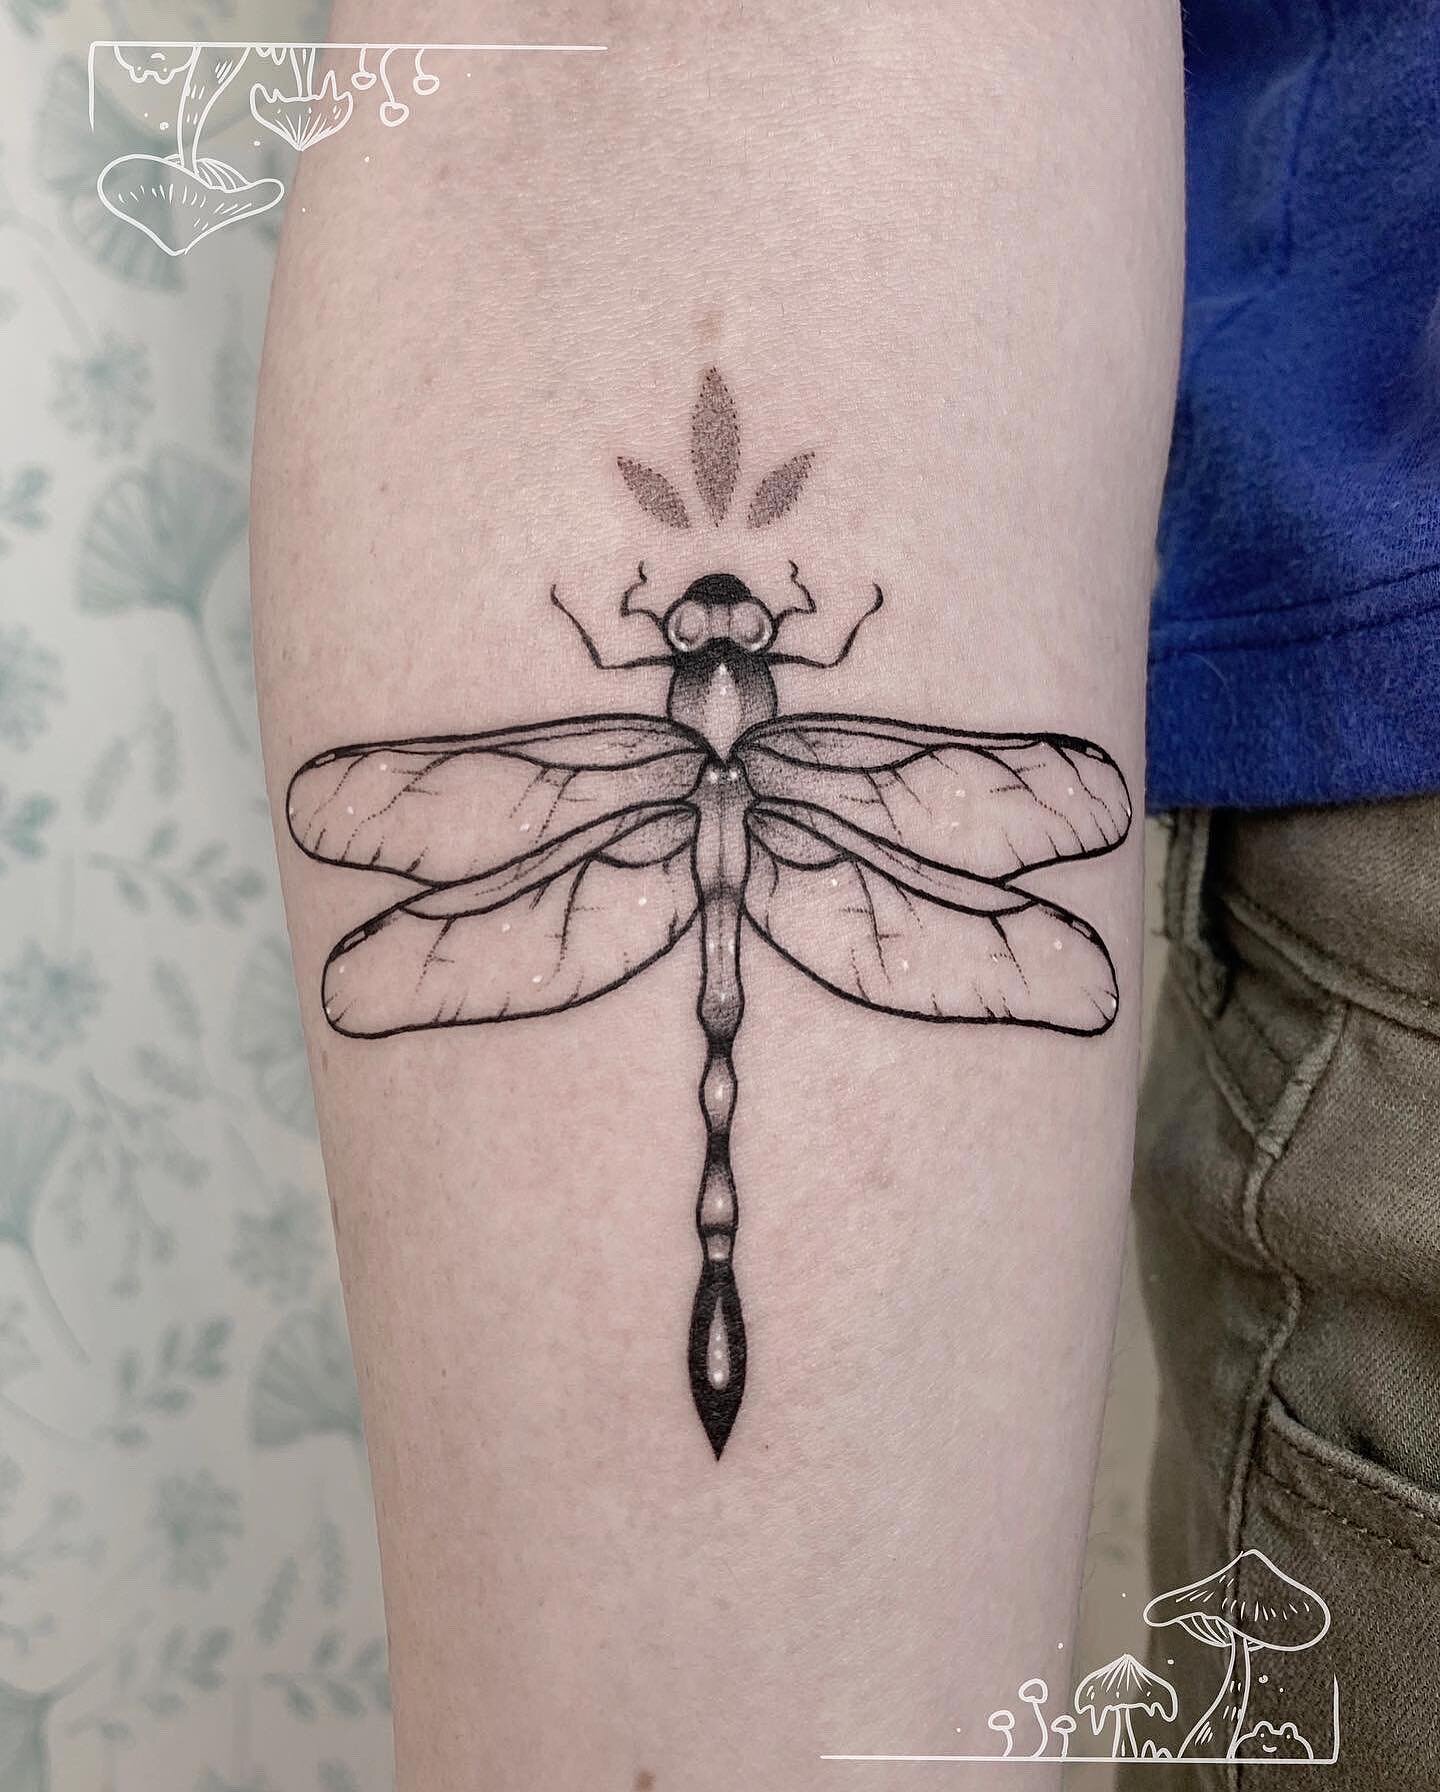 A beautiful dragonfly by our apprentice Avery @hazel.cicada! Those white highlights are the perfect finishing touch! ✨
.
.
.
.
.
#apprenticetattoo #tattooapprentice #dragonflytattoo #dragonfly #blackwork #blackworktattoo #blacktattoo #blxckink #black